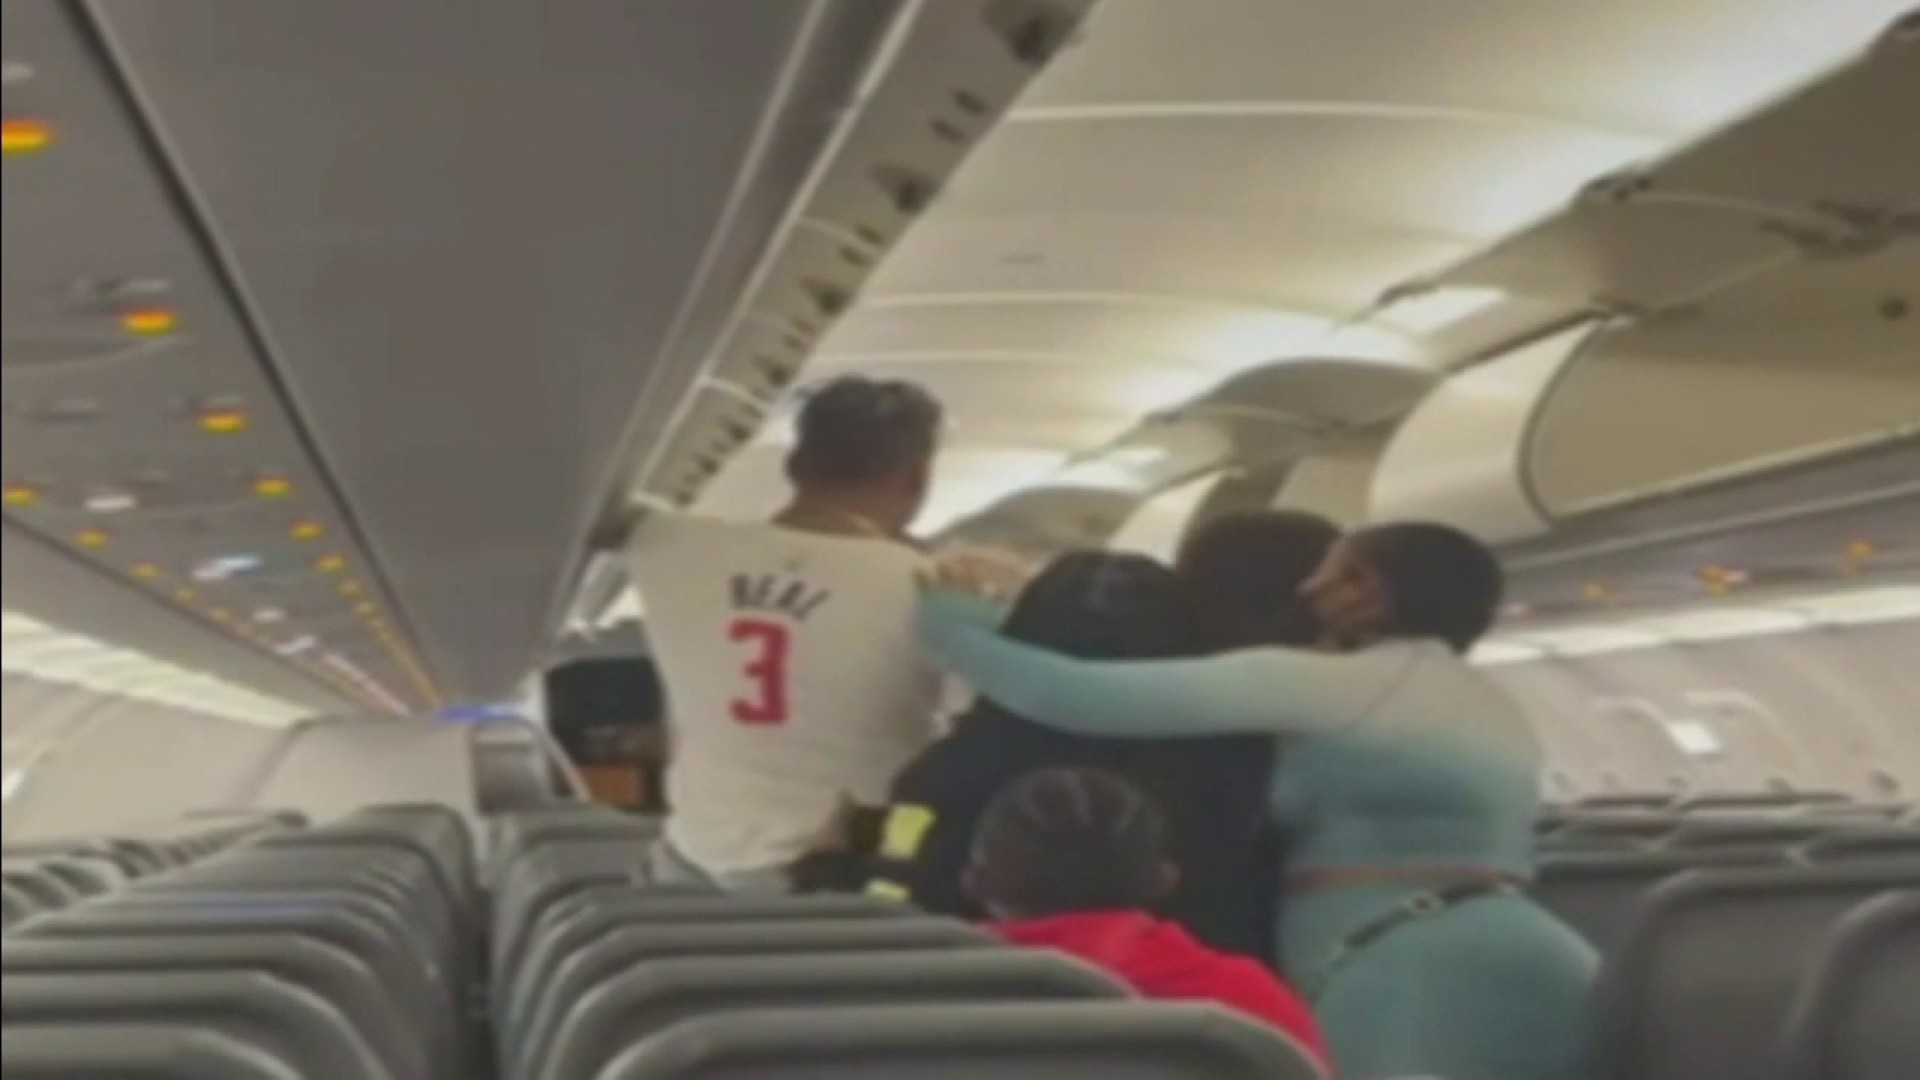 Passenger says brawl caught on video of MIA Frontier Airlines flight was racially motivated